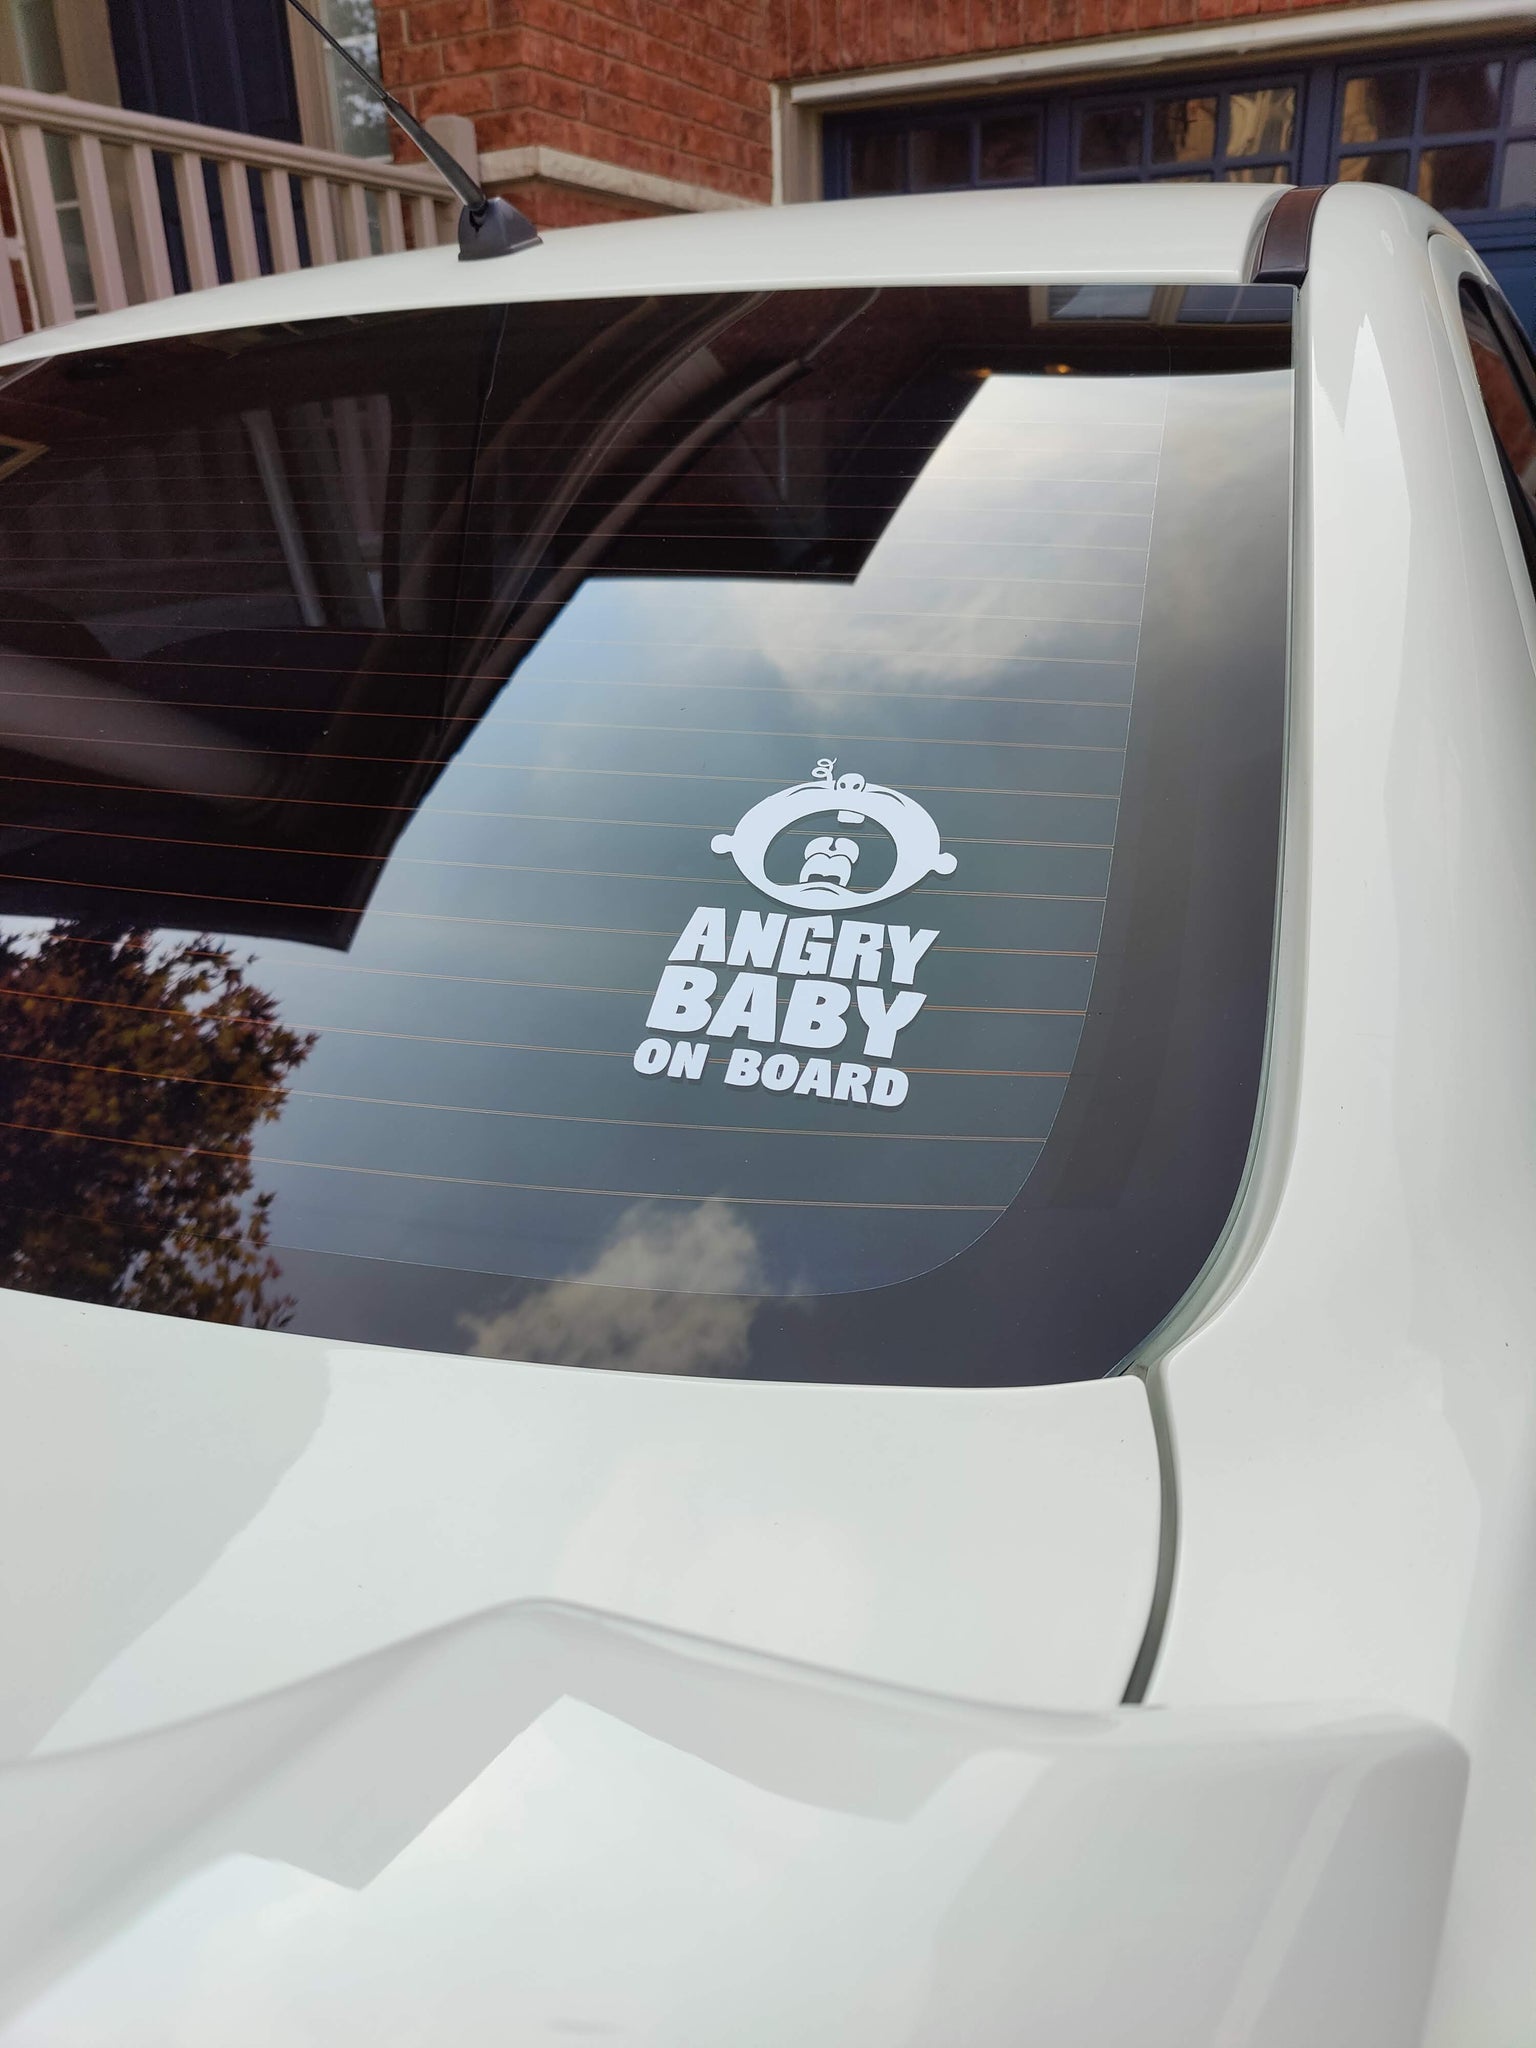 "Angry Baby on Board" Decals: For Those Feisty Little Ones!